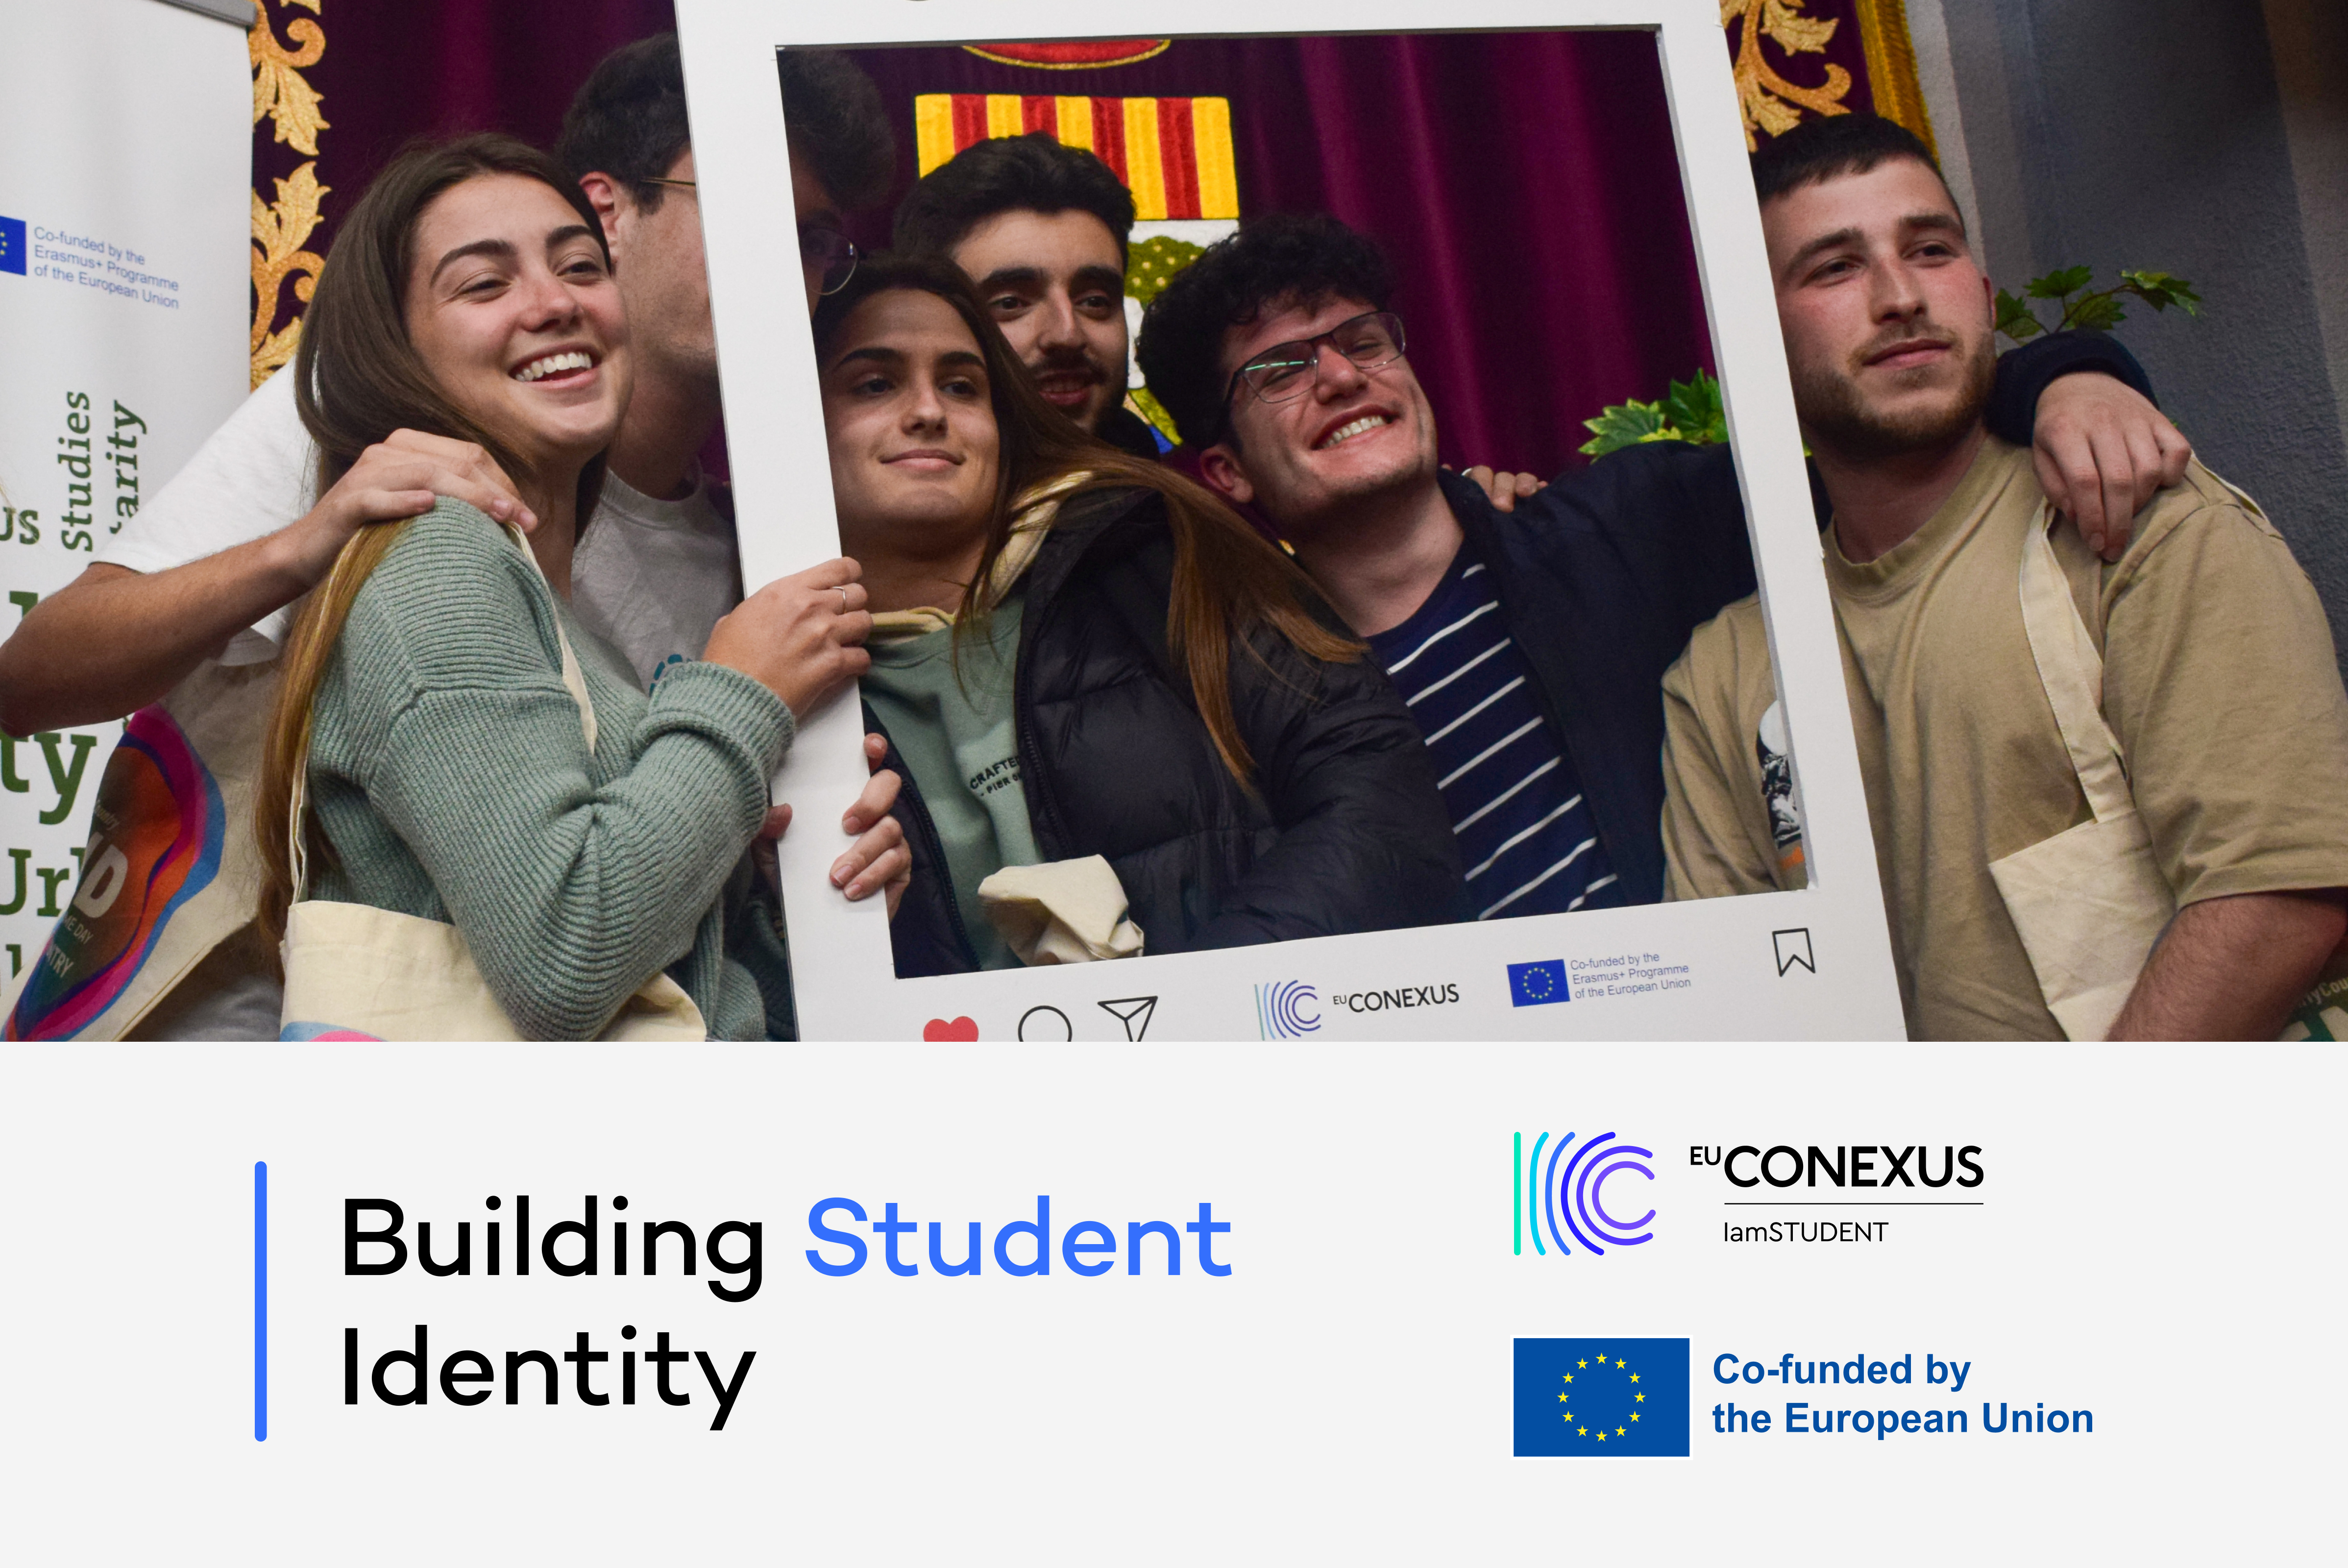 The new Erasmus+ project IamSTUDENT